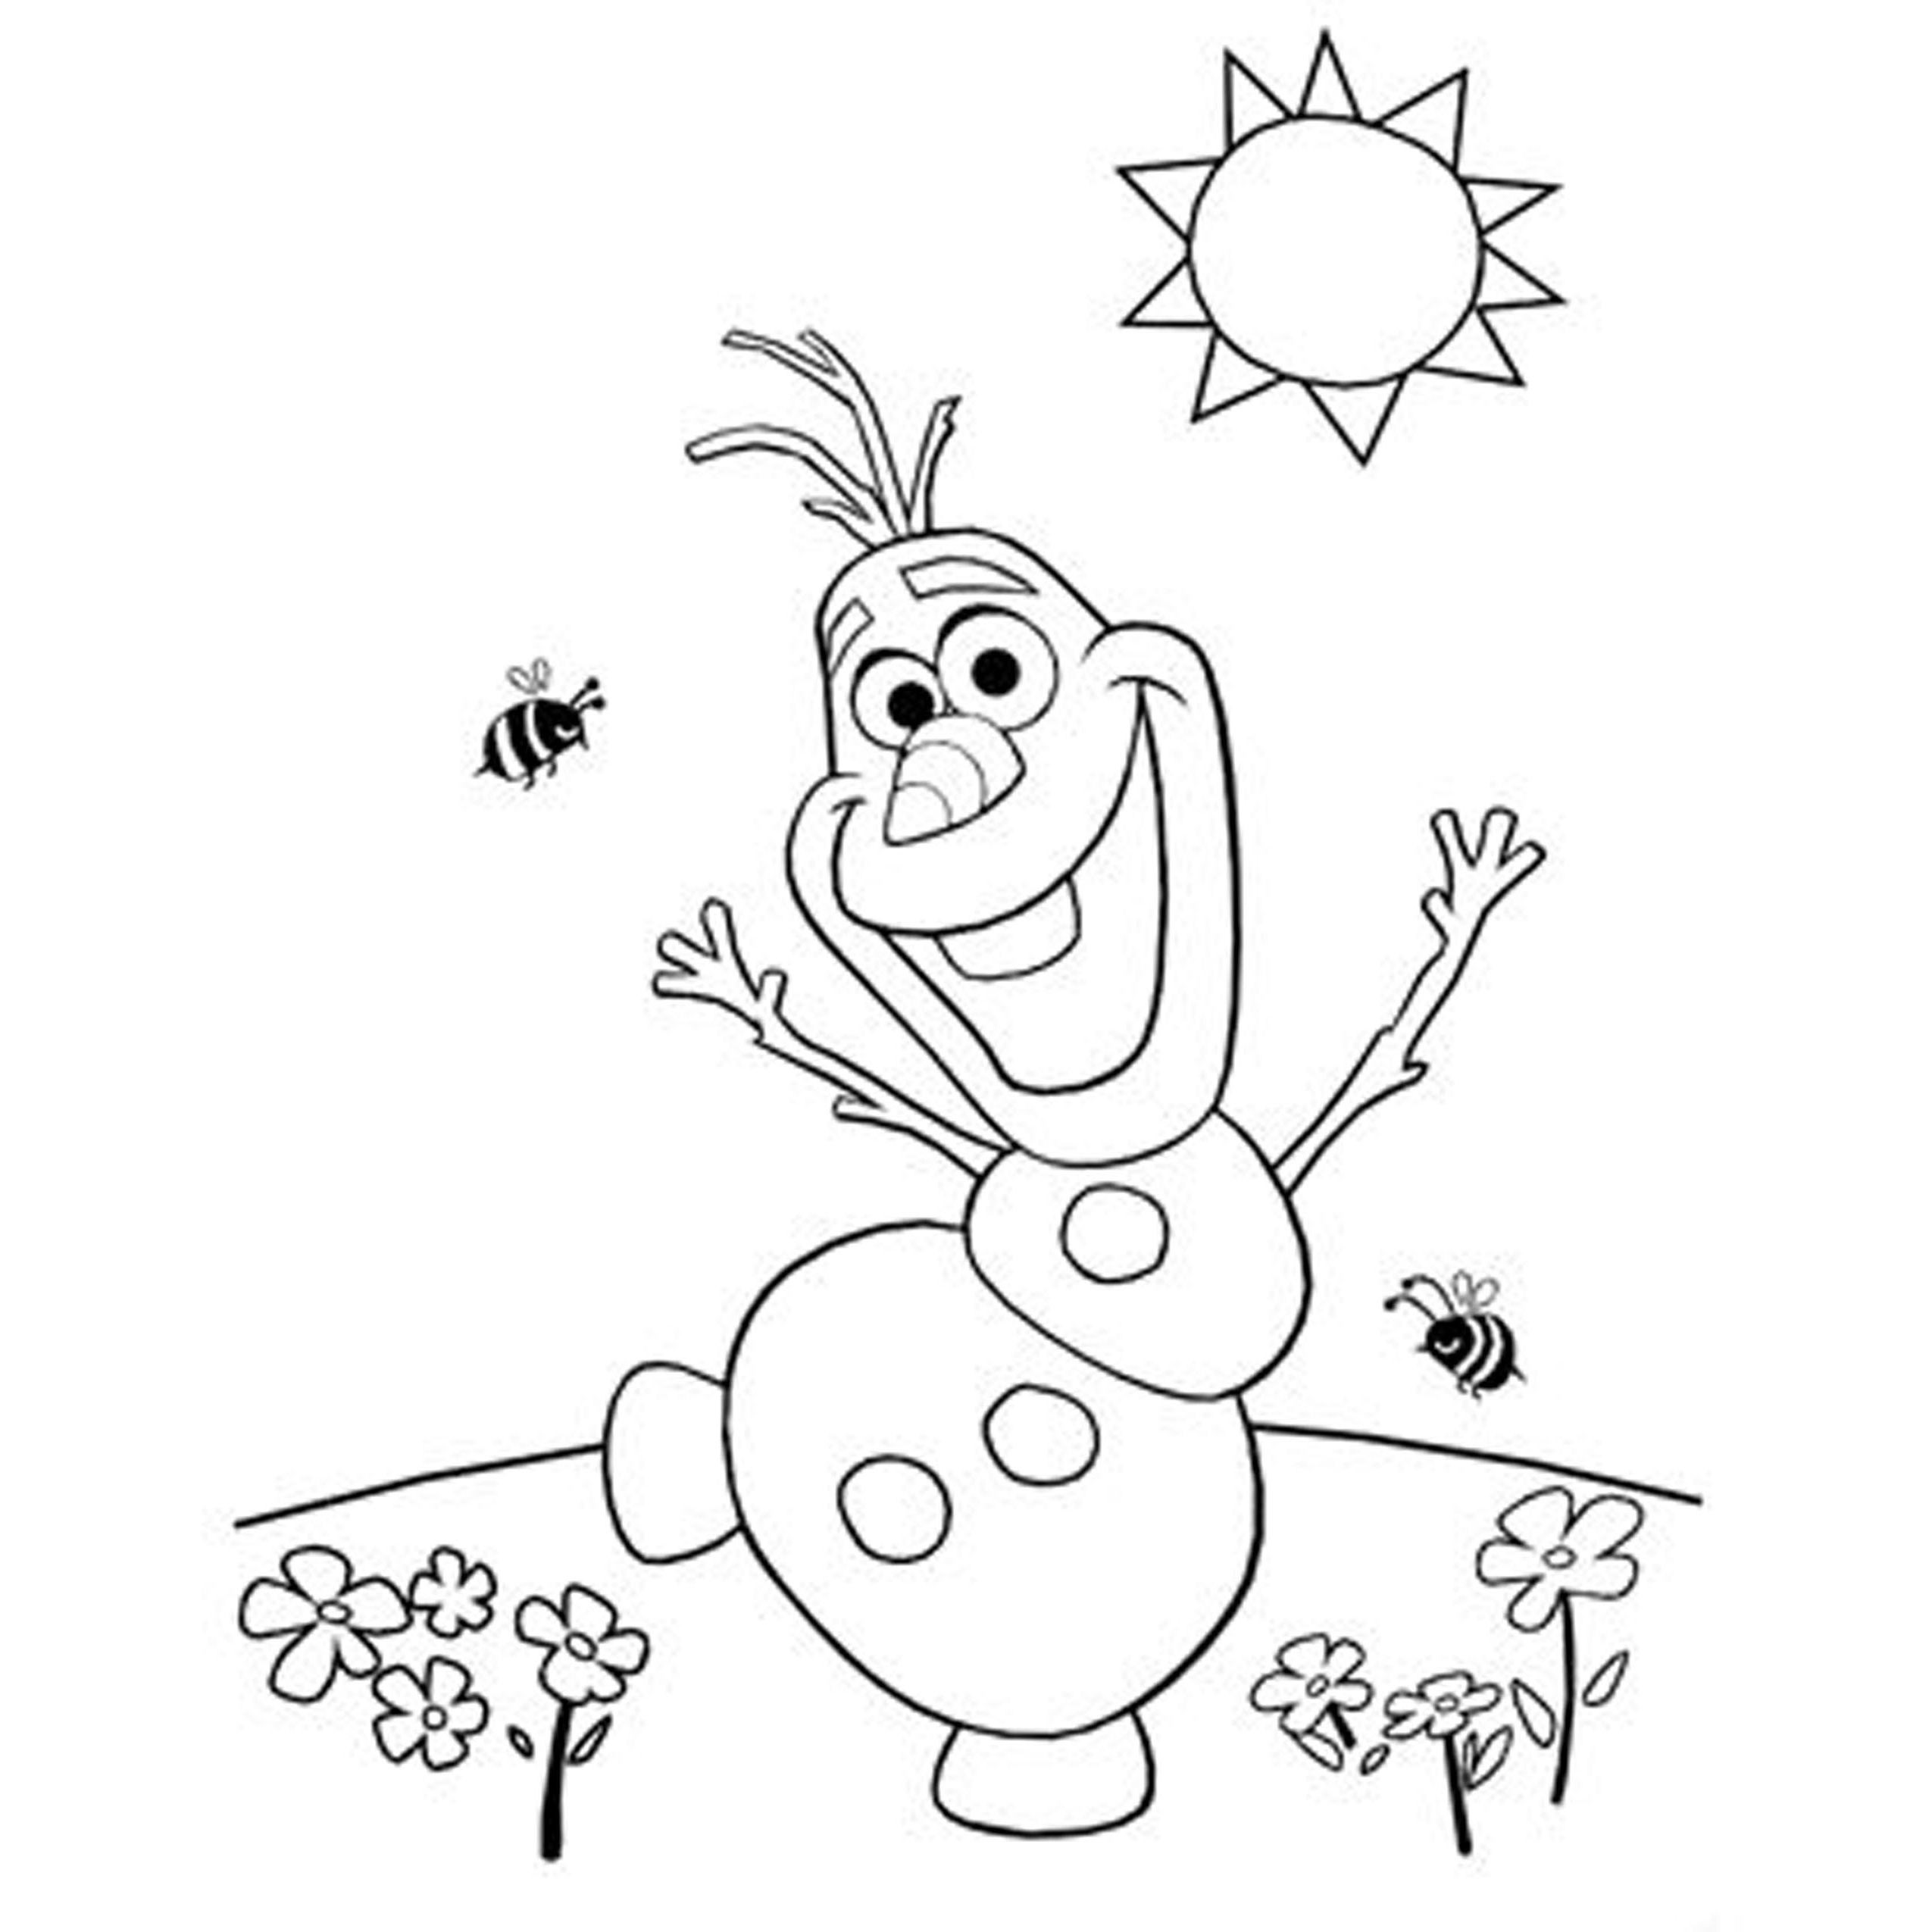 Coloring Pages : Coloring Sheets Pages For Disneyable New ...